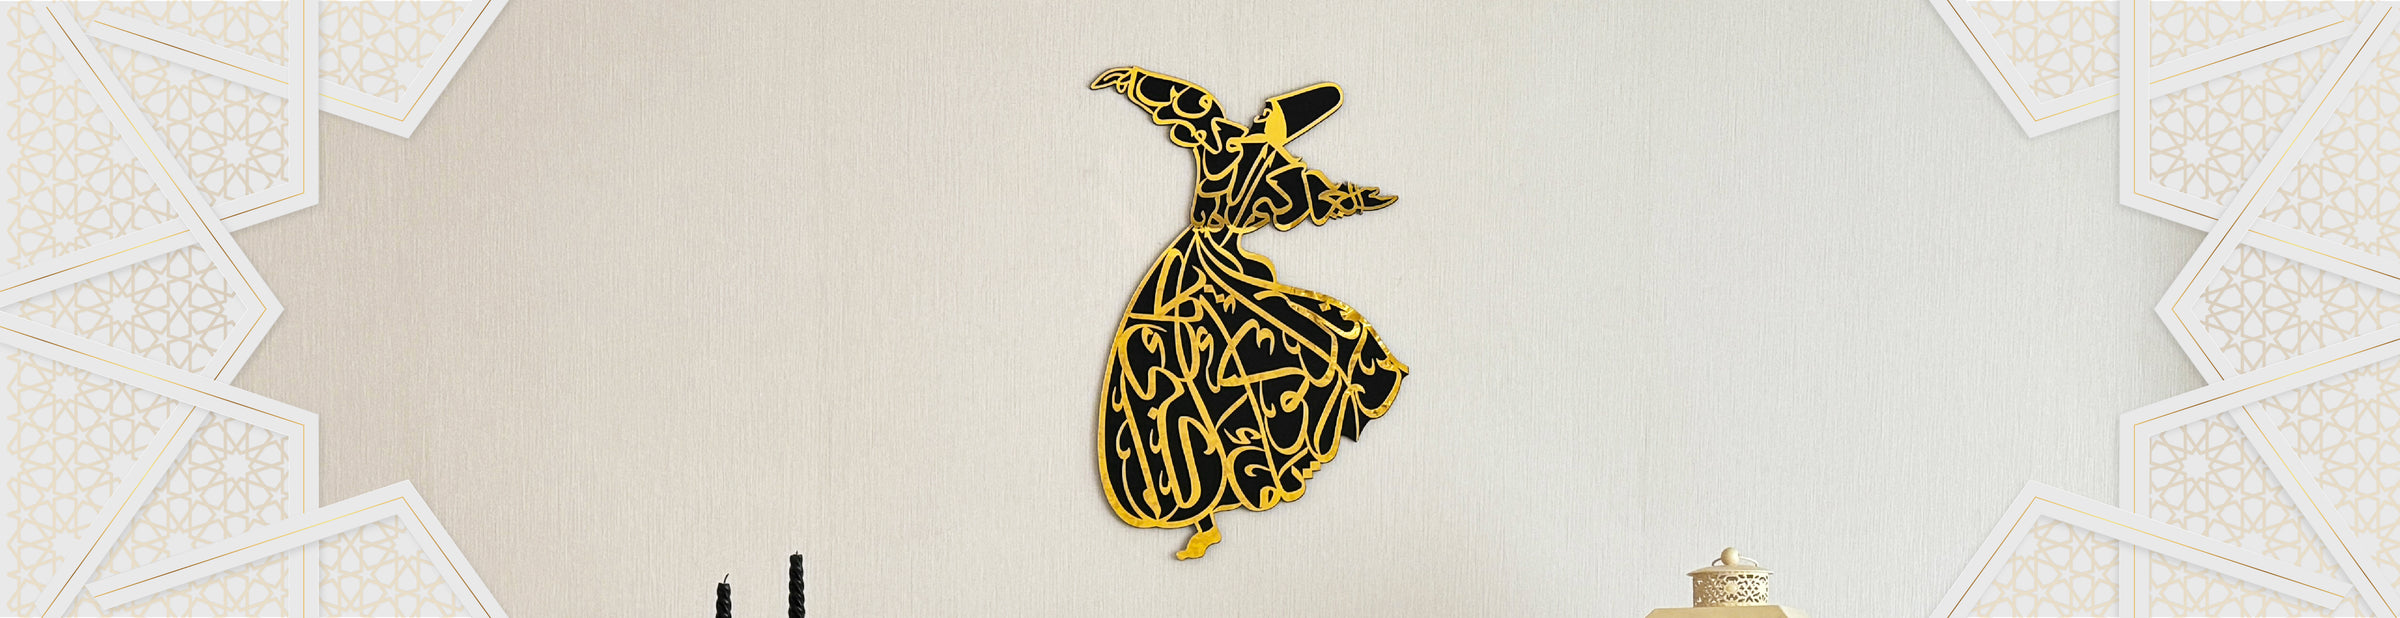 Whirling Dervish - Islamic Wall Art